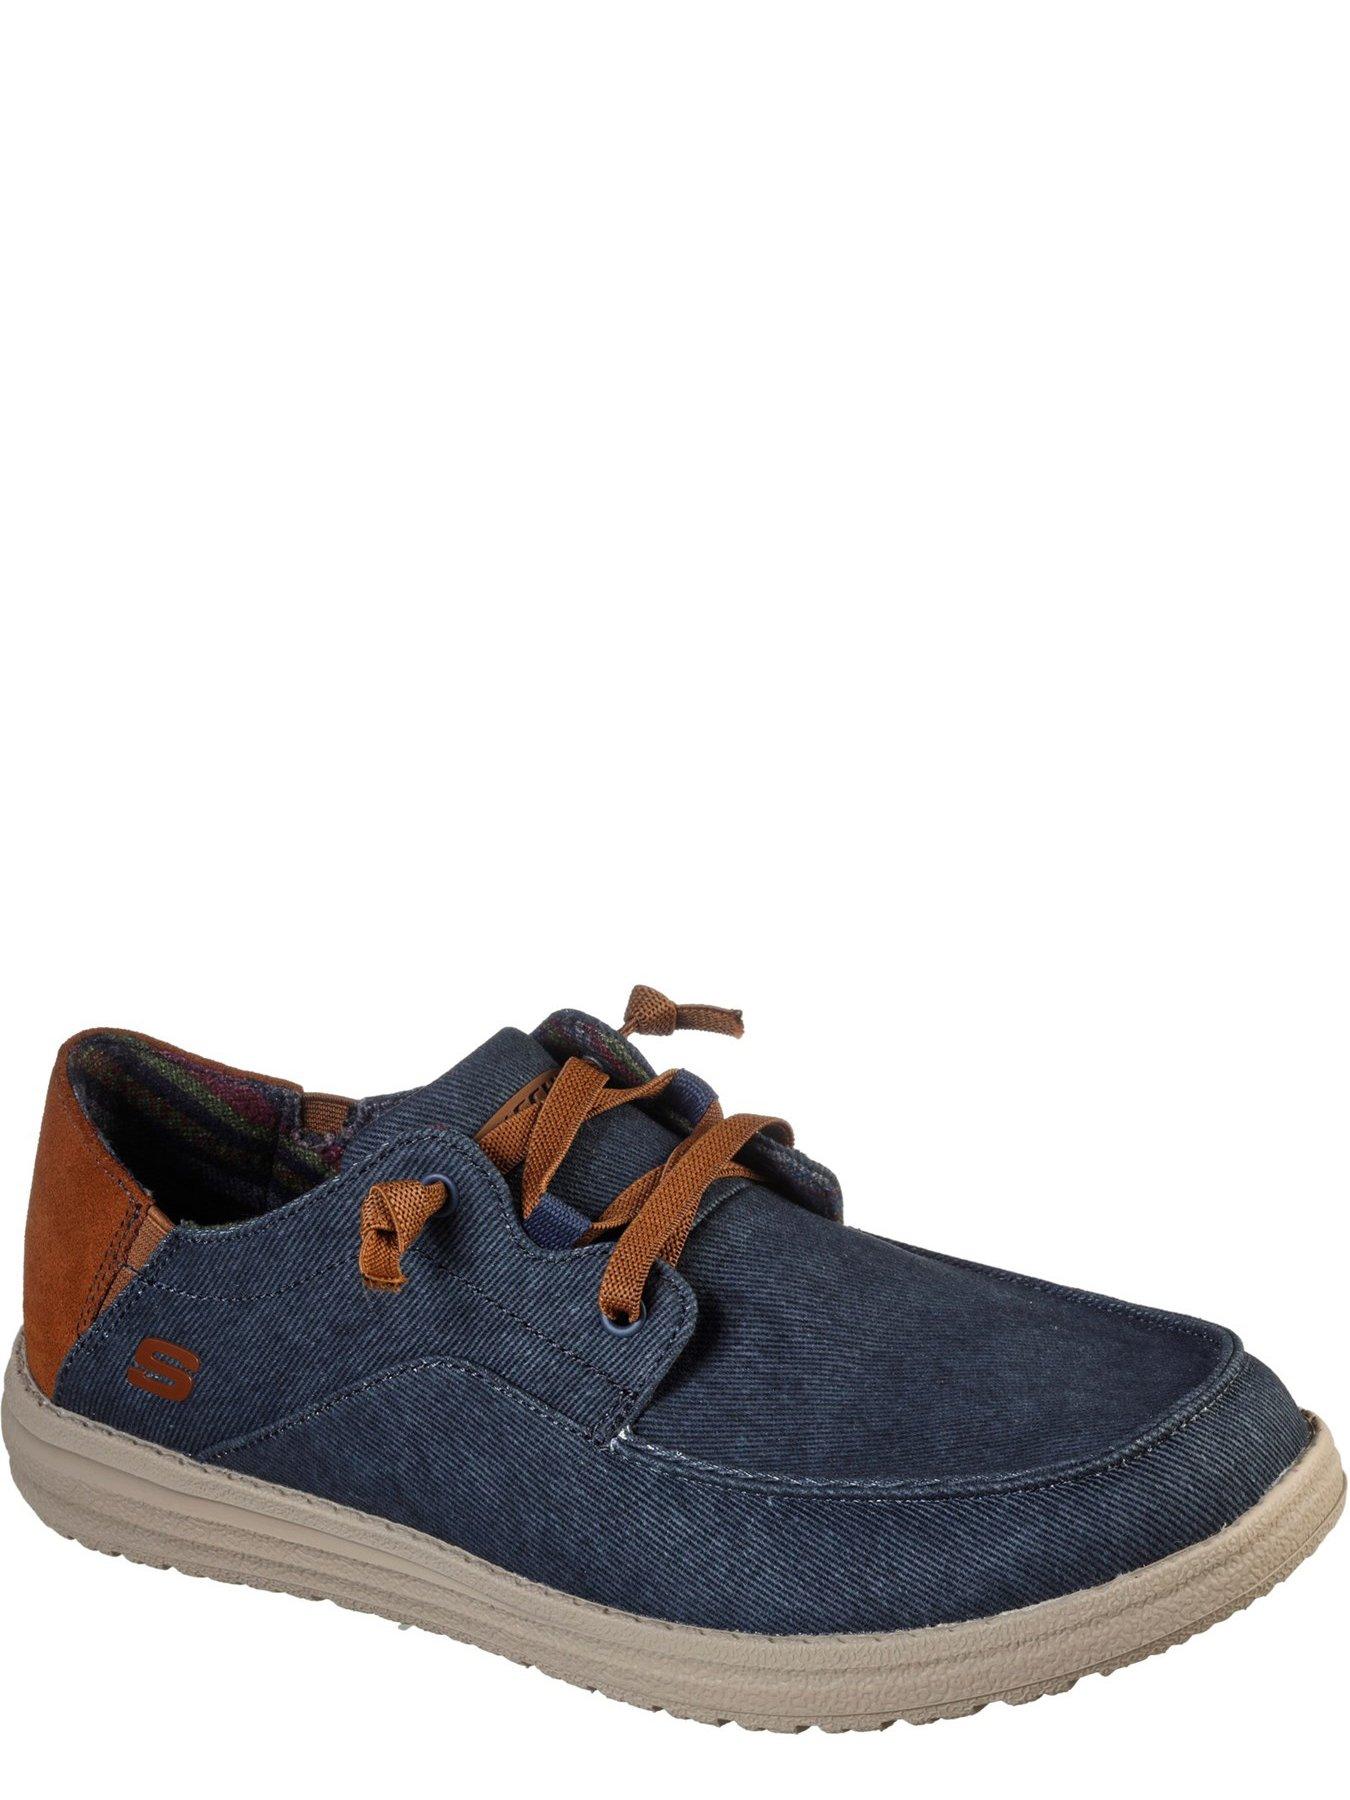 Skechers Air-cooled Goga Mat Arch Streetwear Casual Shoe - Navy